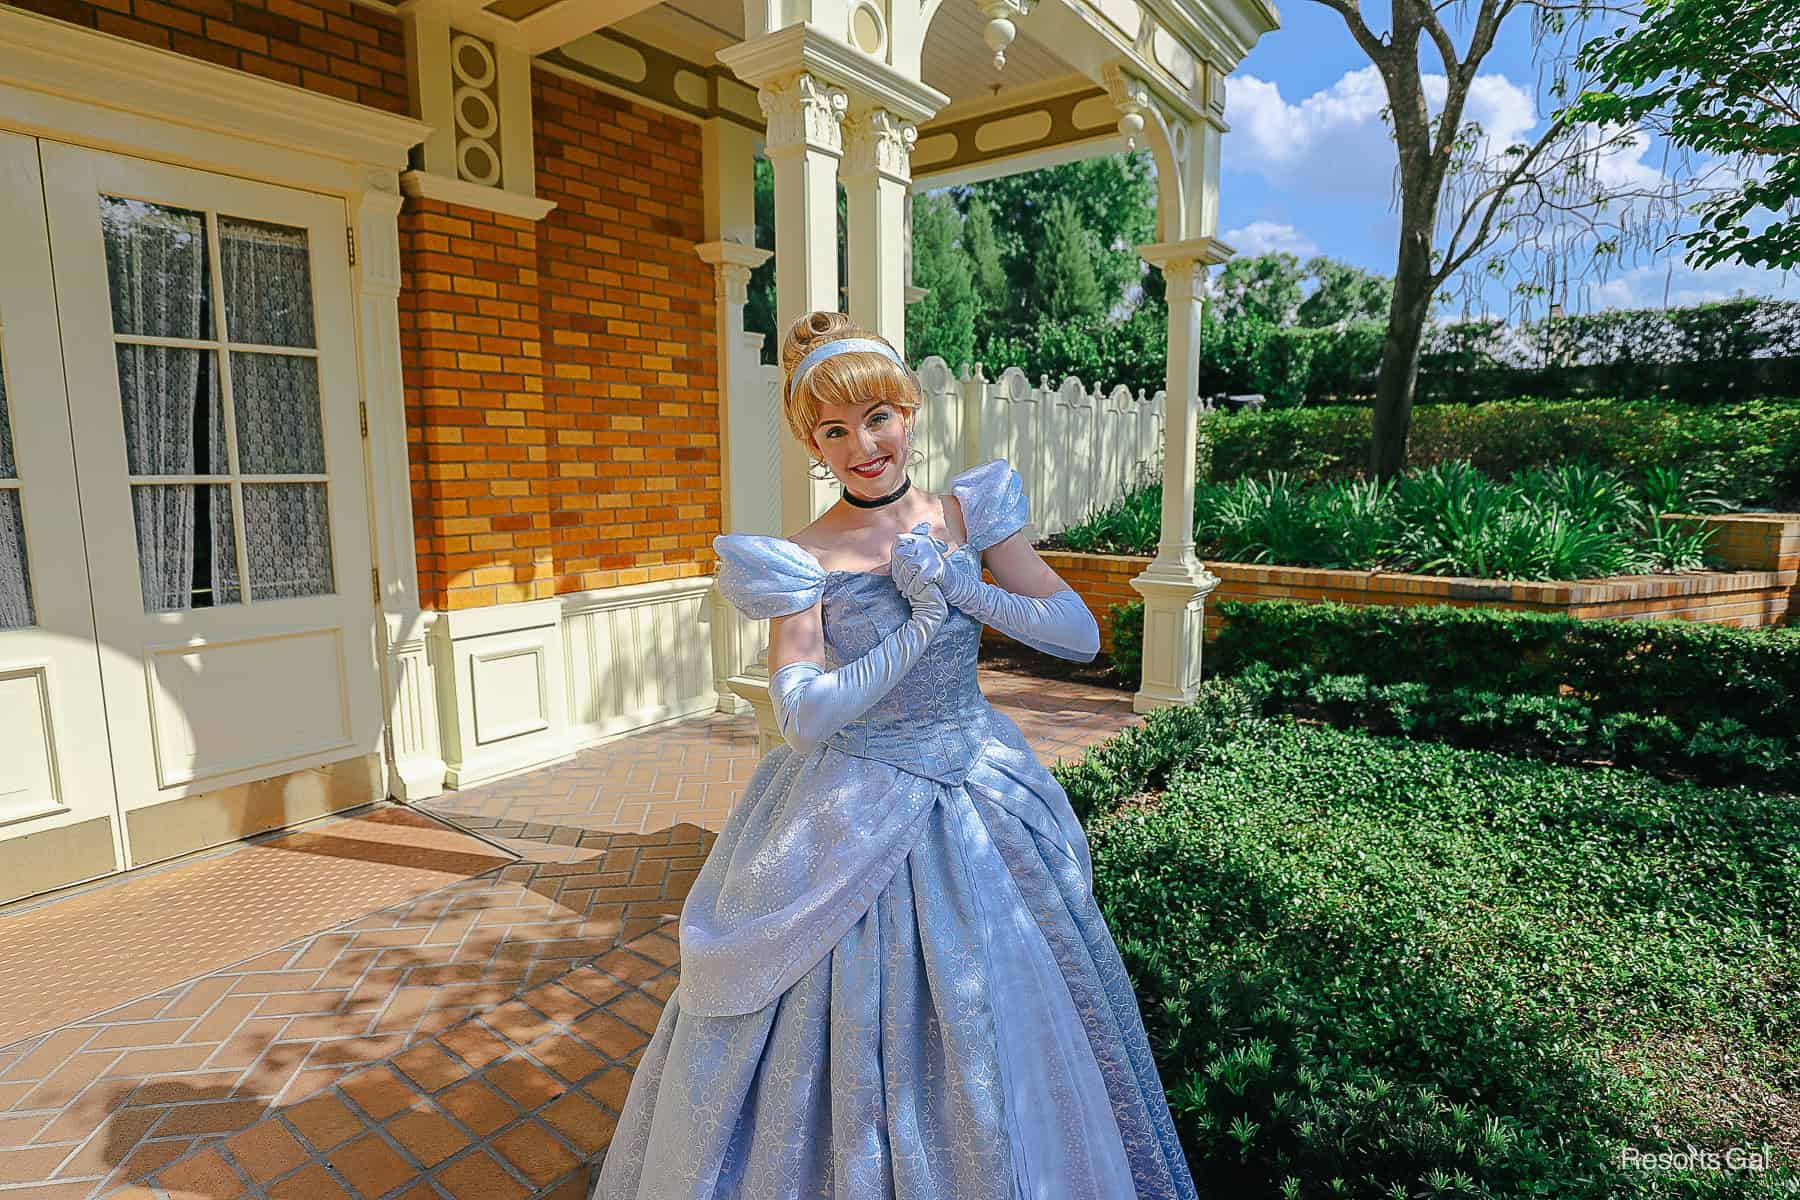 Cinderella as part of a surprise character meet on the Town Square Patio. 